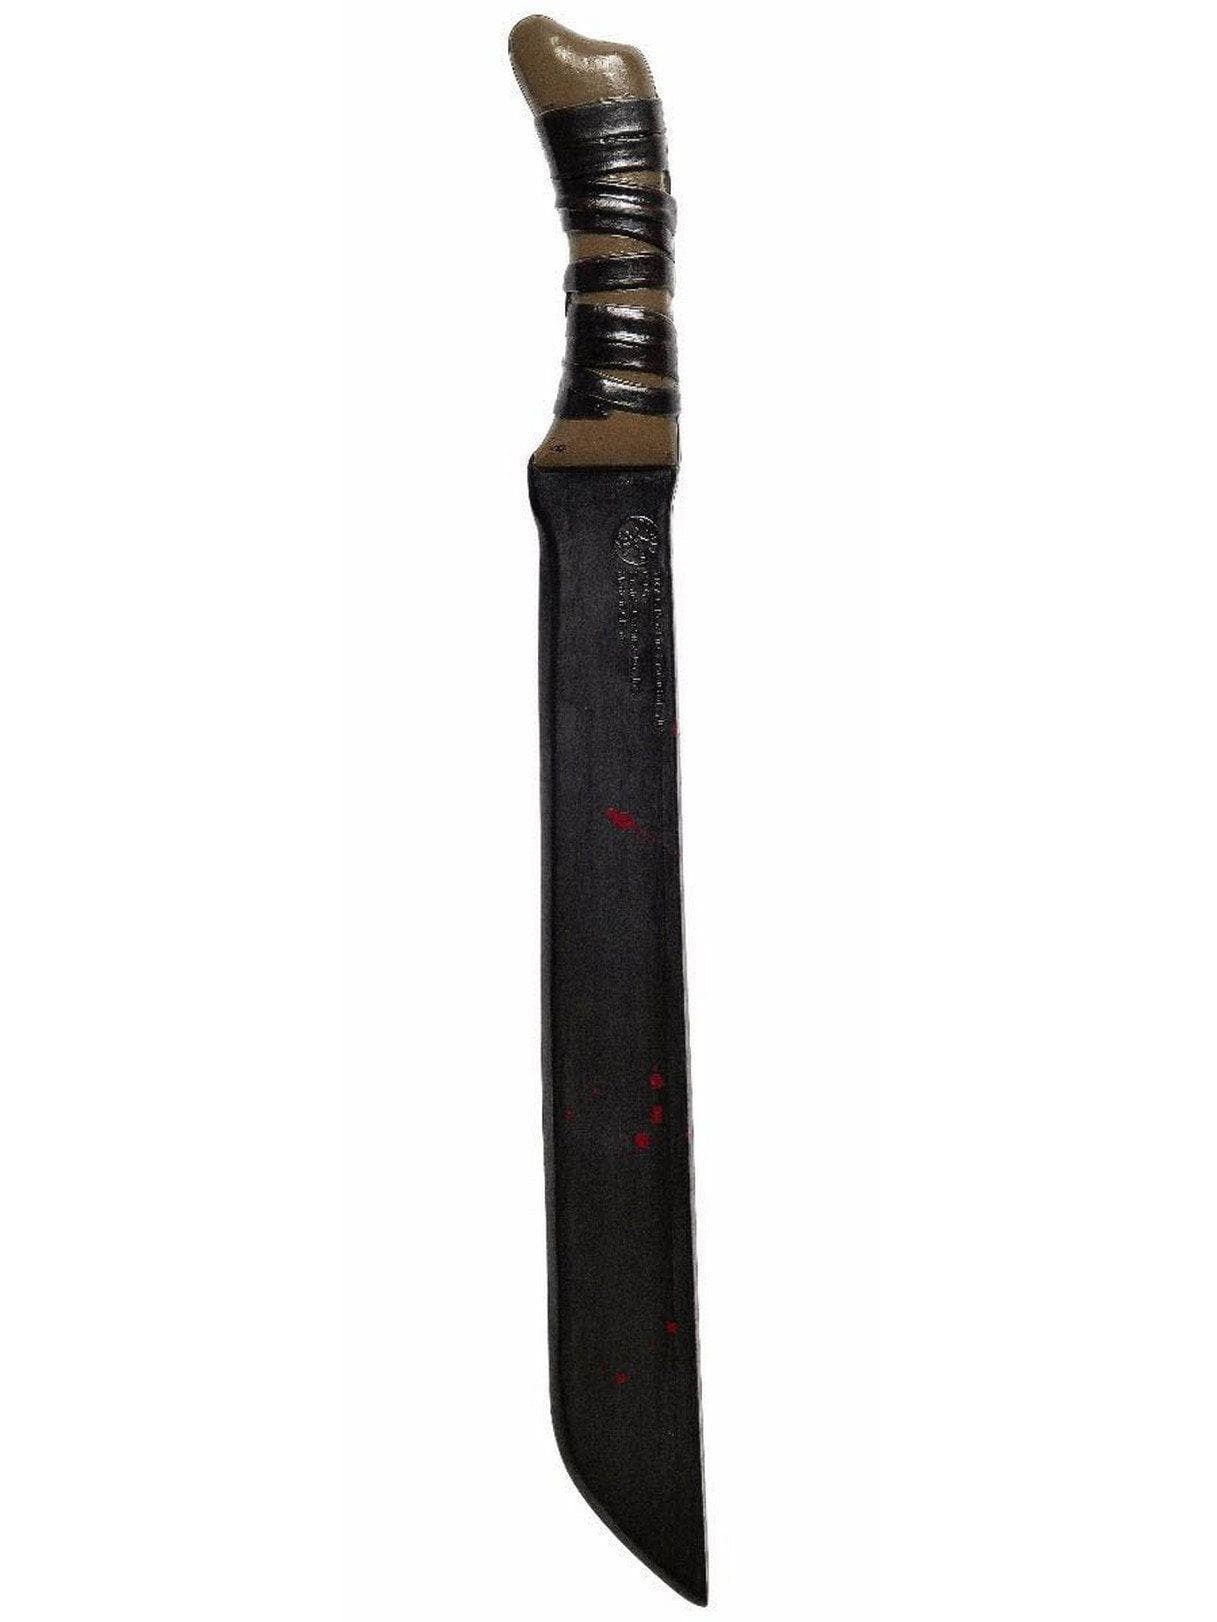 Adult Friday The 13th Jason Voorhees Machete - Deluxe - costumes.com